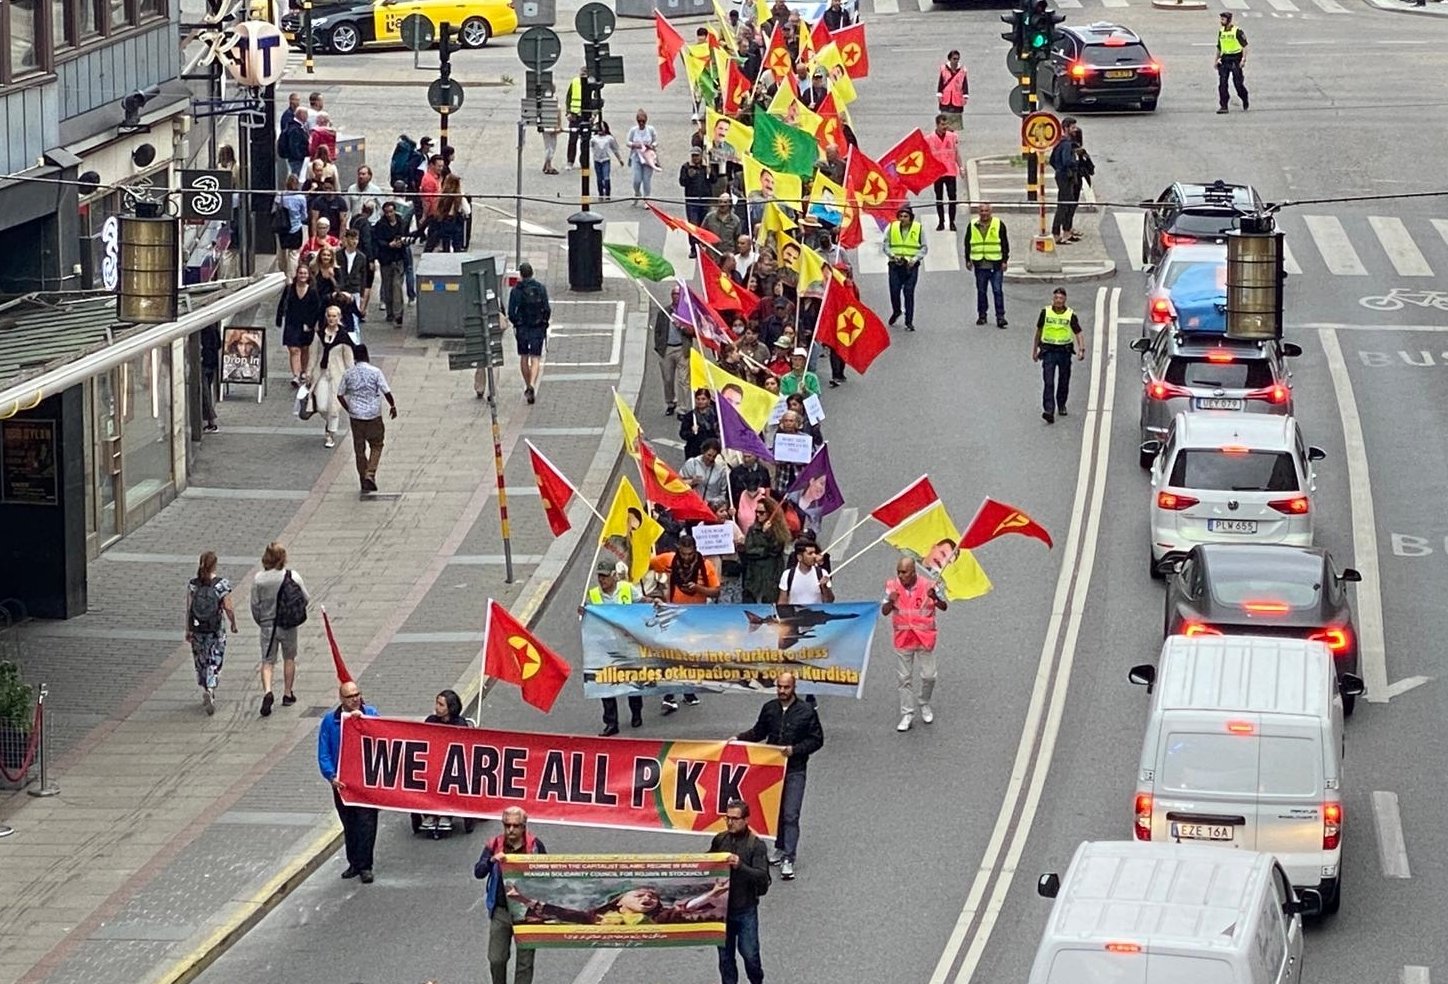 PKK/YPG terrorist sympathizers carrying portraits of PKK leader and so-called flags of the terrorist group march in Stockholm, Sweden, July 27, 2022. (AA File Photo)